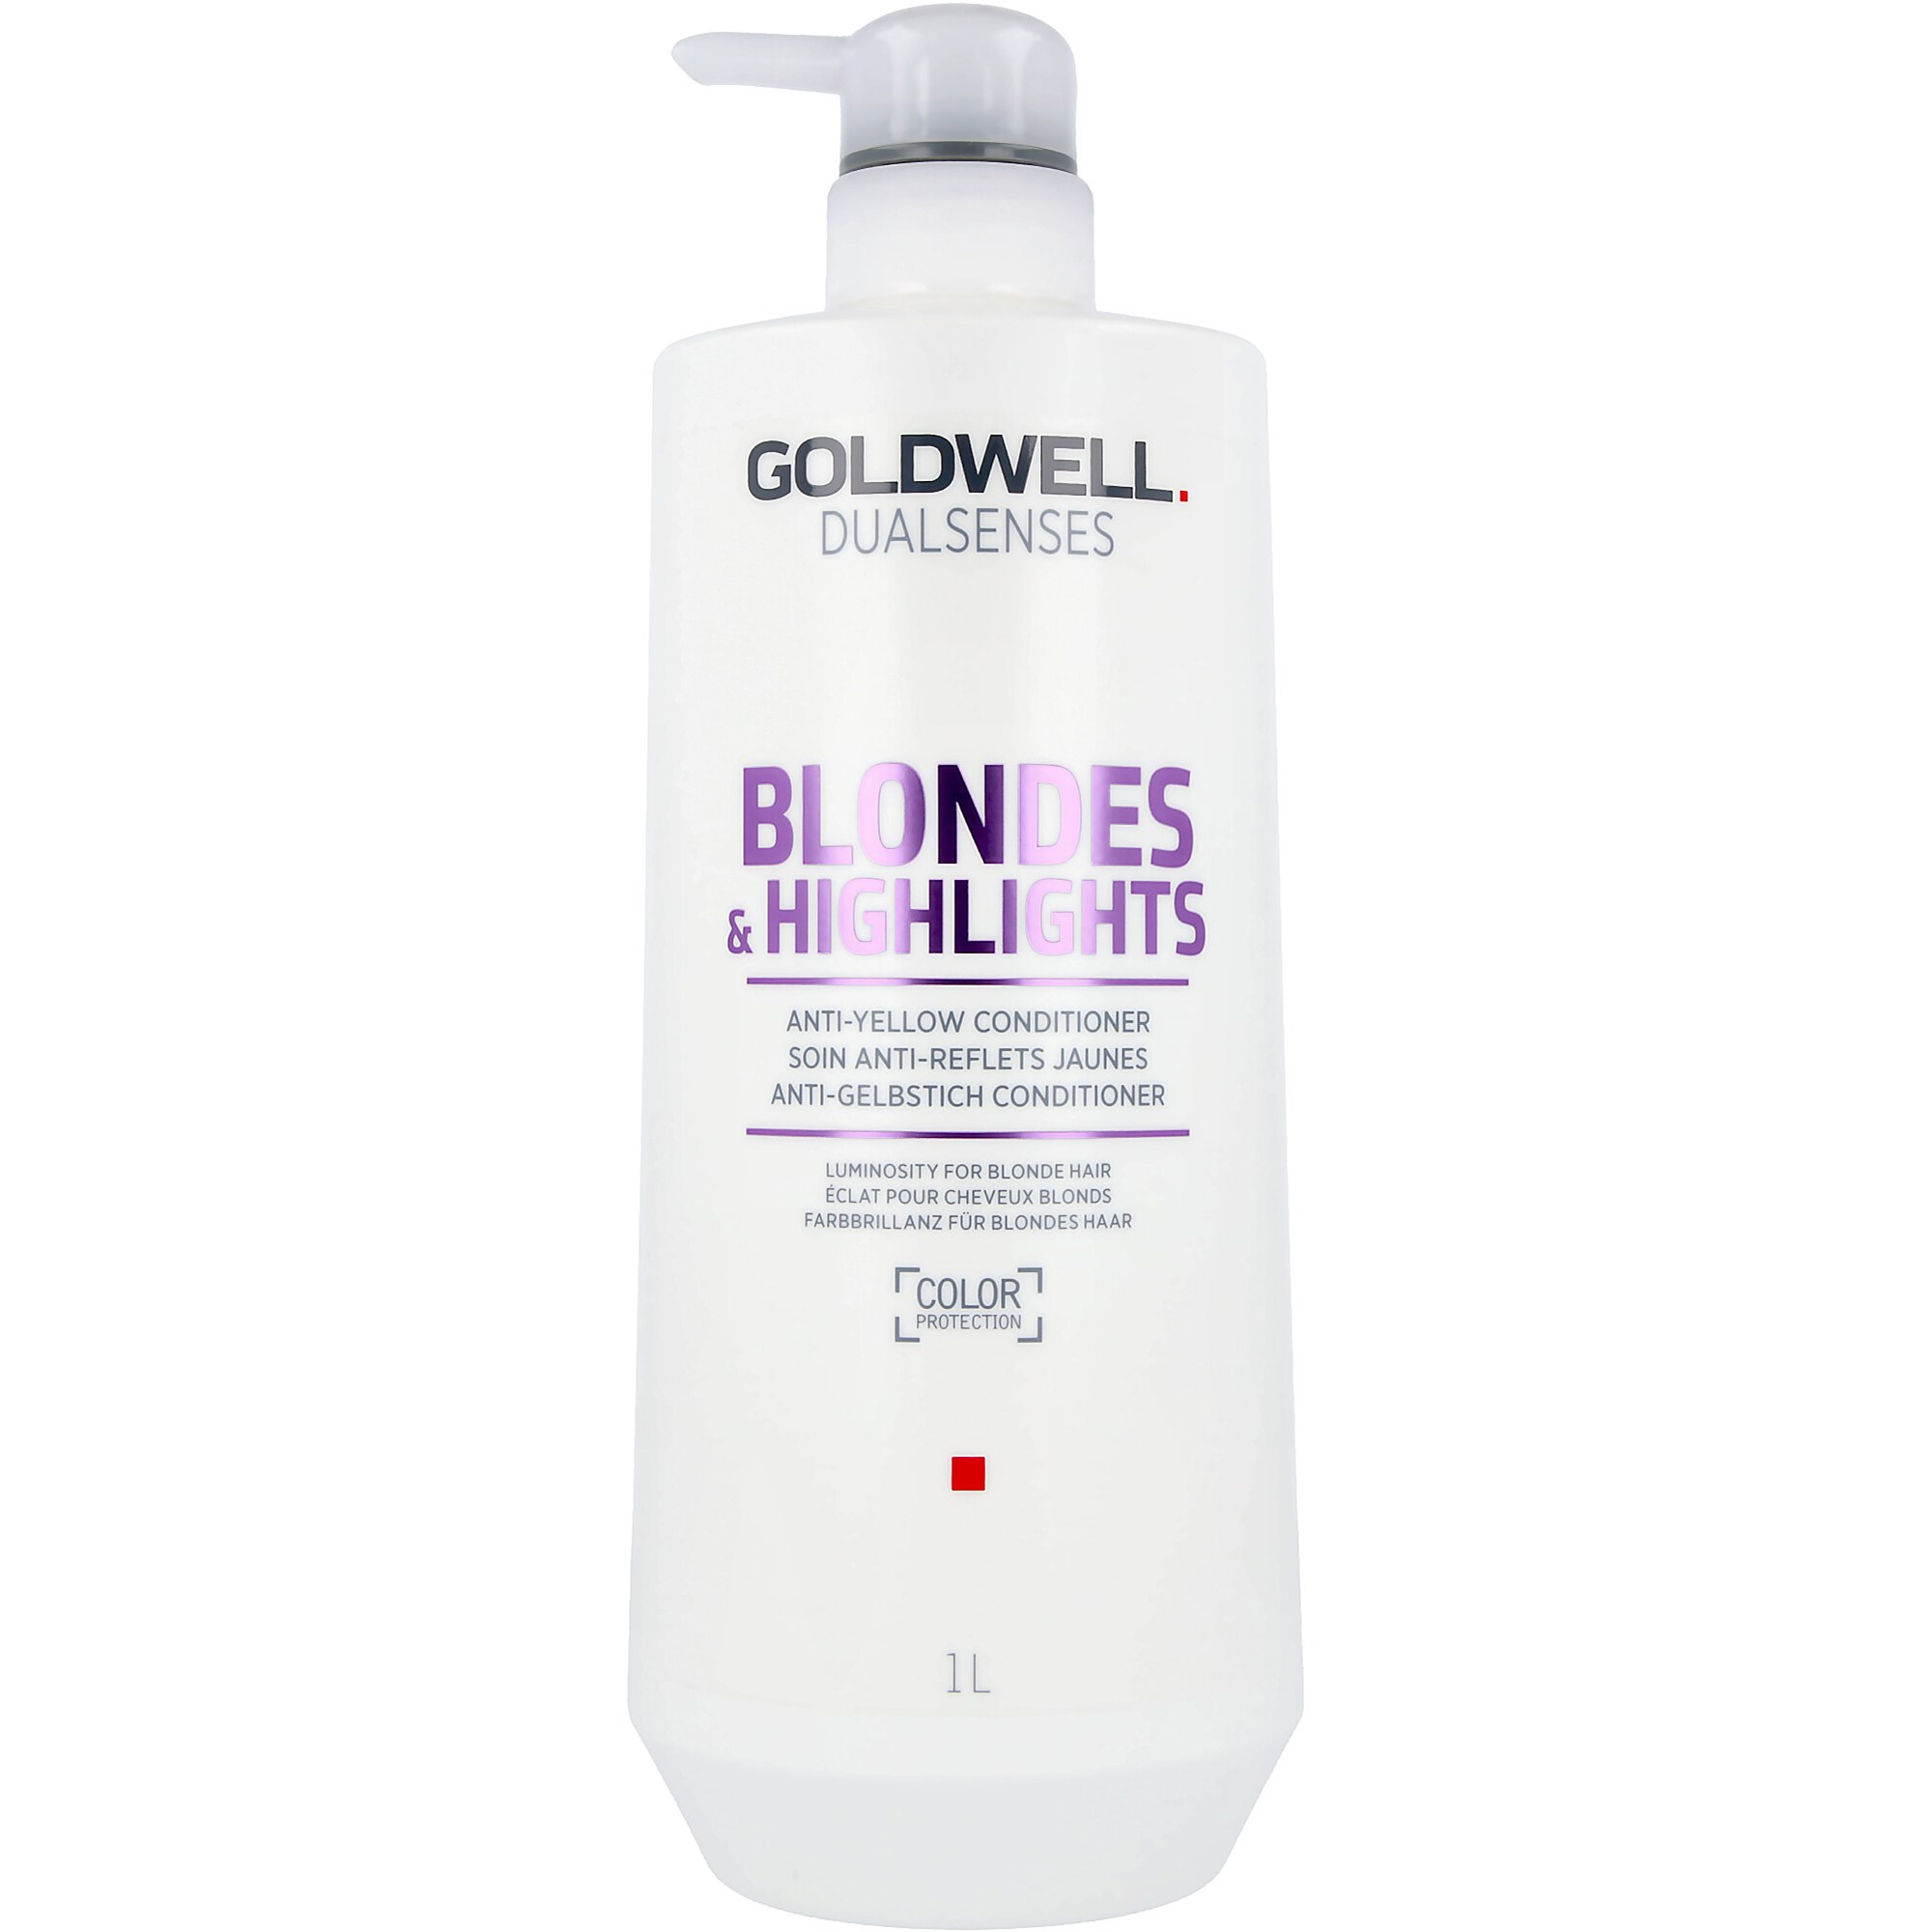 Goldwell Dualsenses Blondes & Highlights Anti-Yellow Conditioner 1000